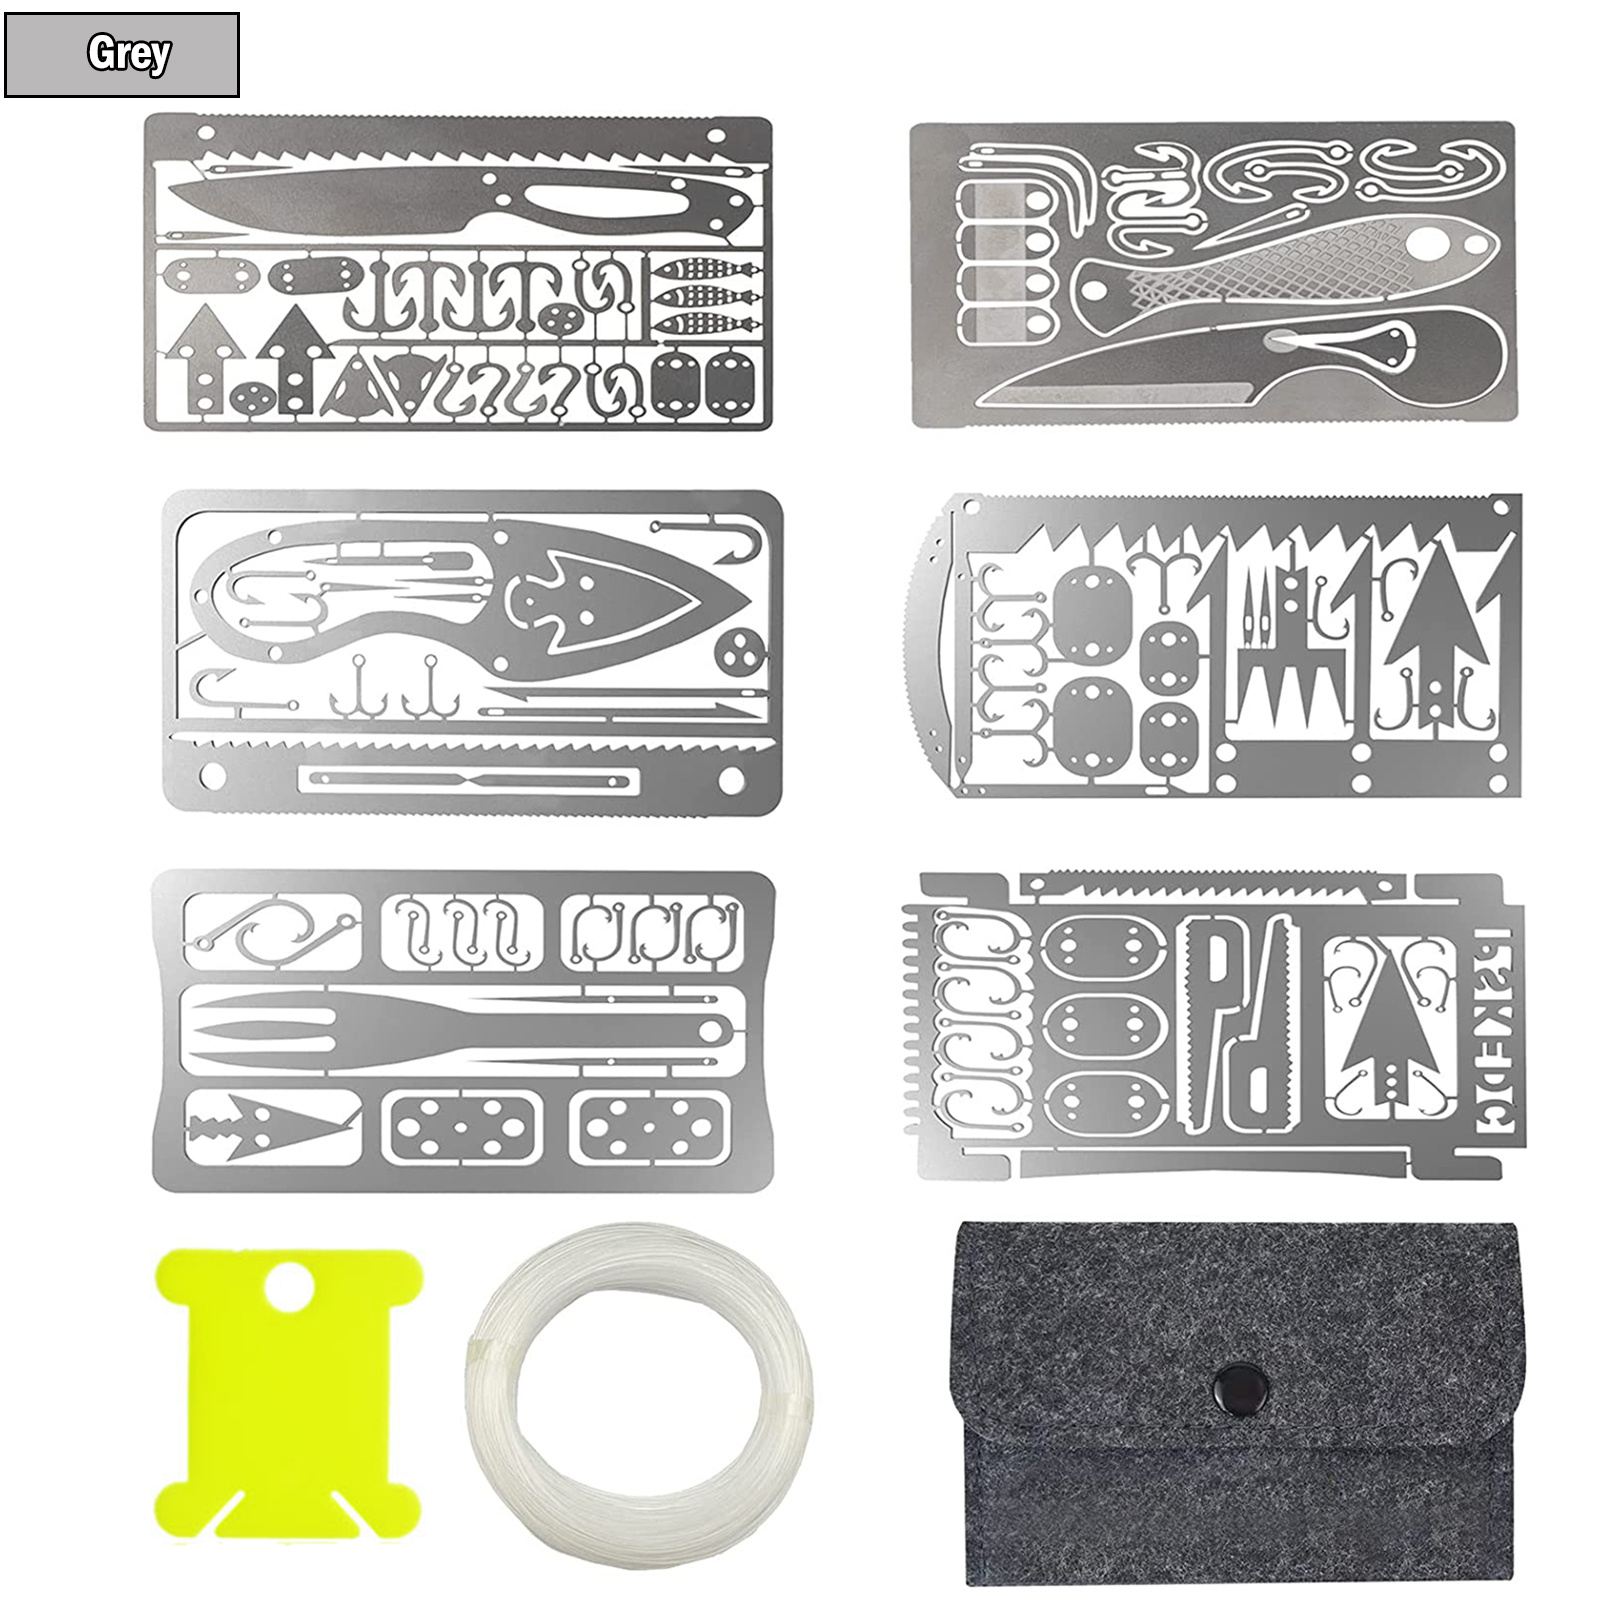 22 In 1 EDC Fishing Gear Kit With Credit Card Multi Tool For Outdoor Camping,  Hunting, And Emergencies 2020 Edition From Superfactory2019, $0.81